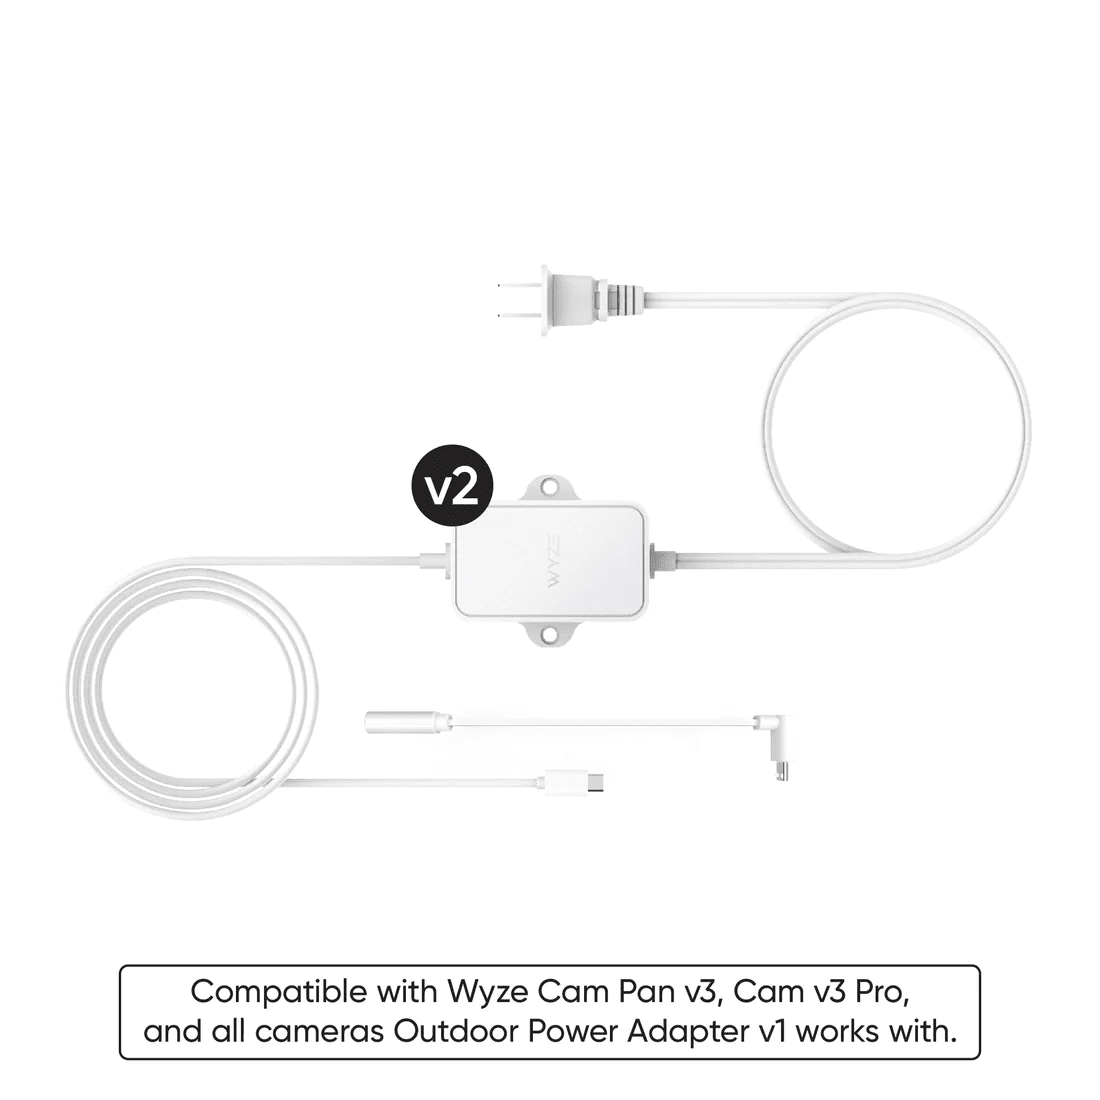 Wyze Cam Power Adapter v2 laid out against a white background.